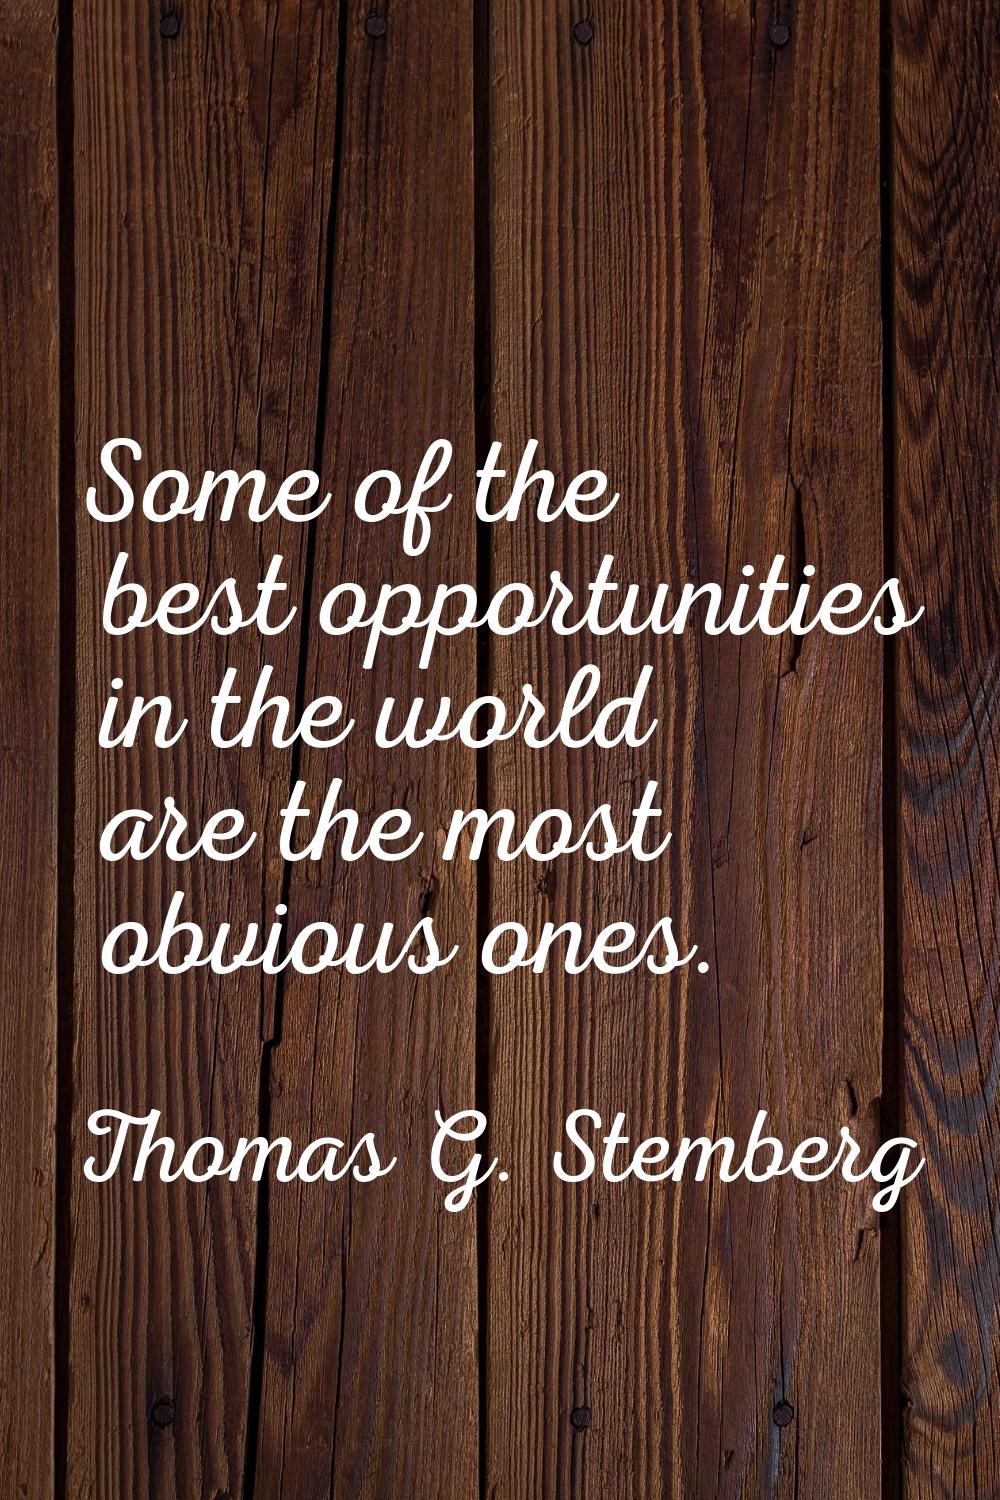 Some of the best opportunities in the world are the most obvious ones.